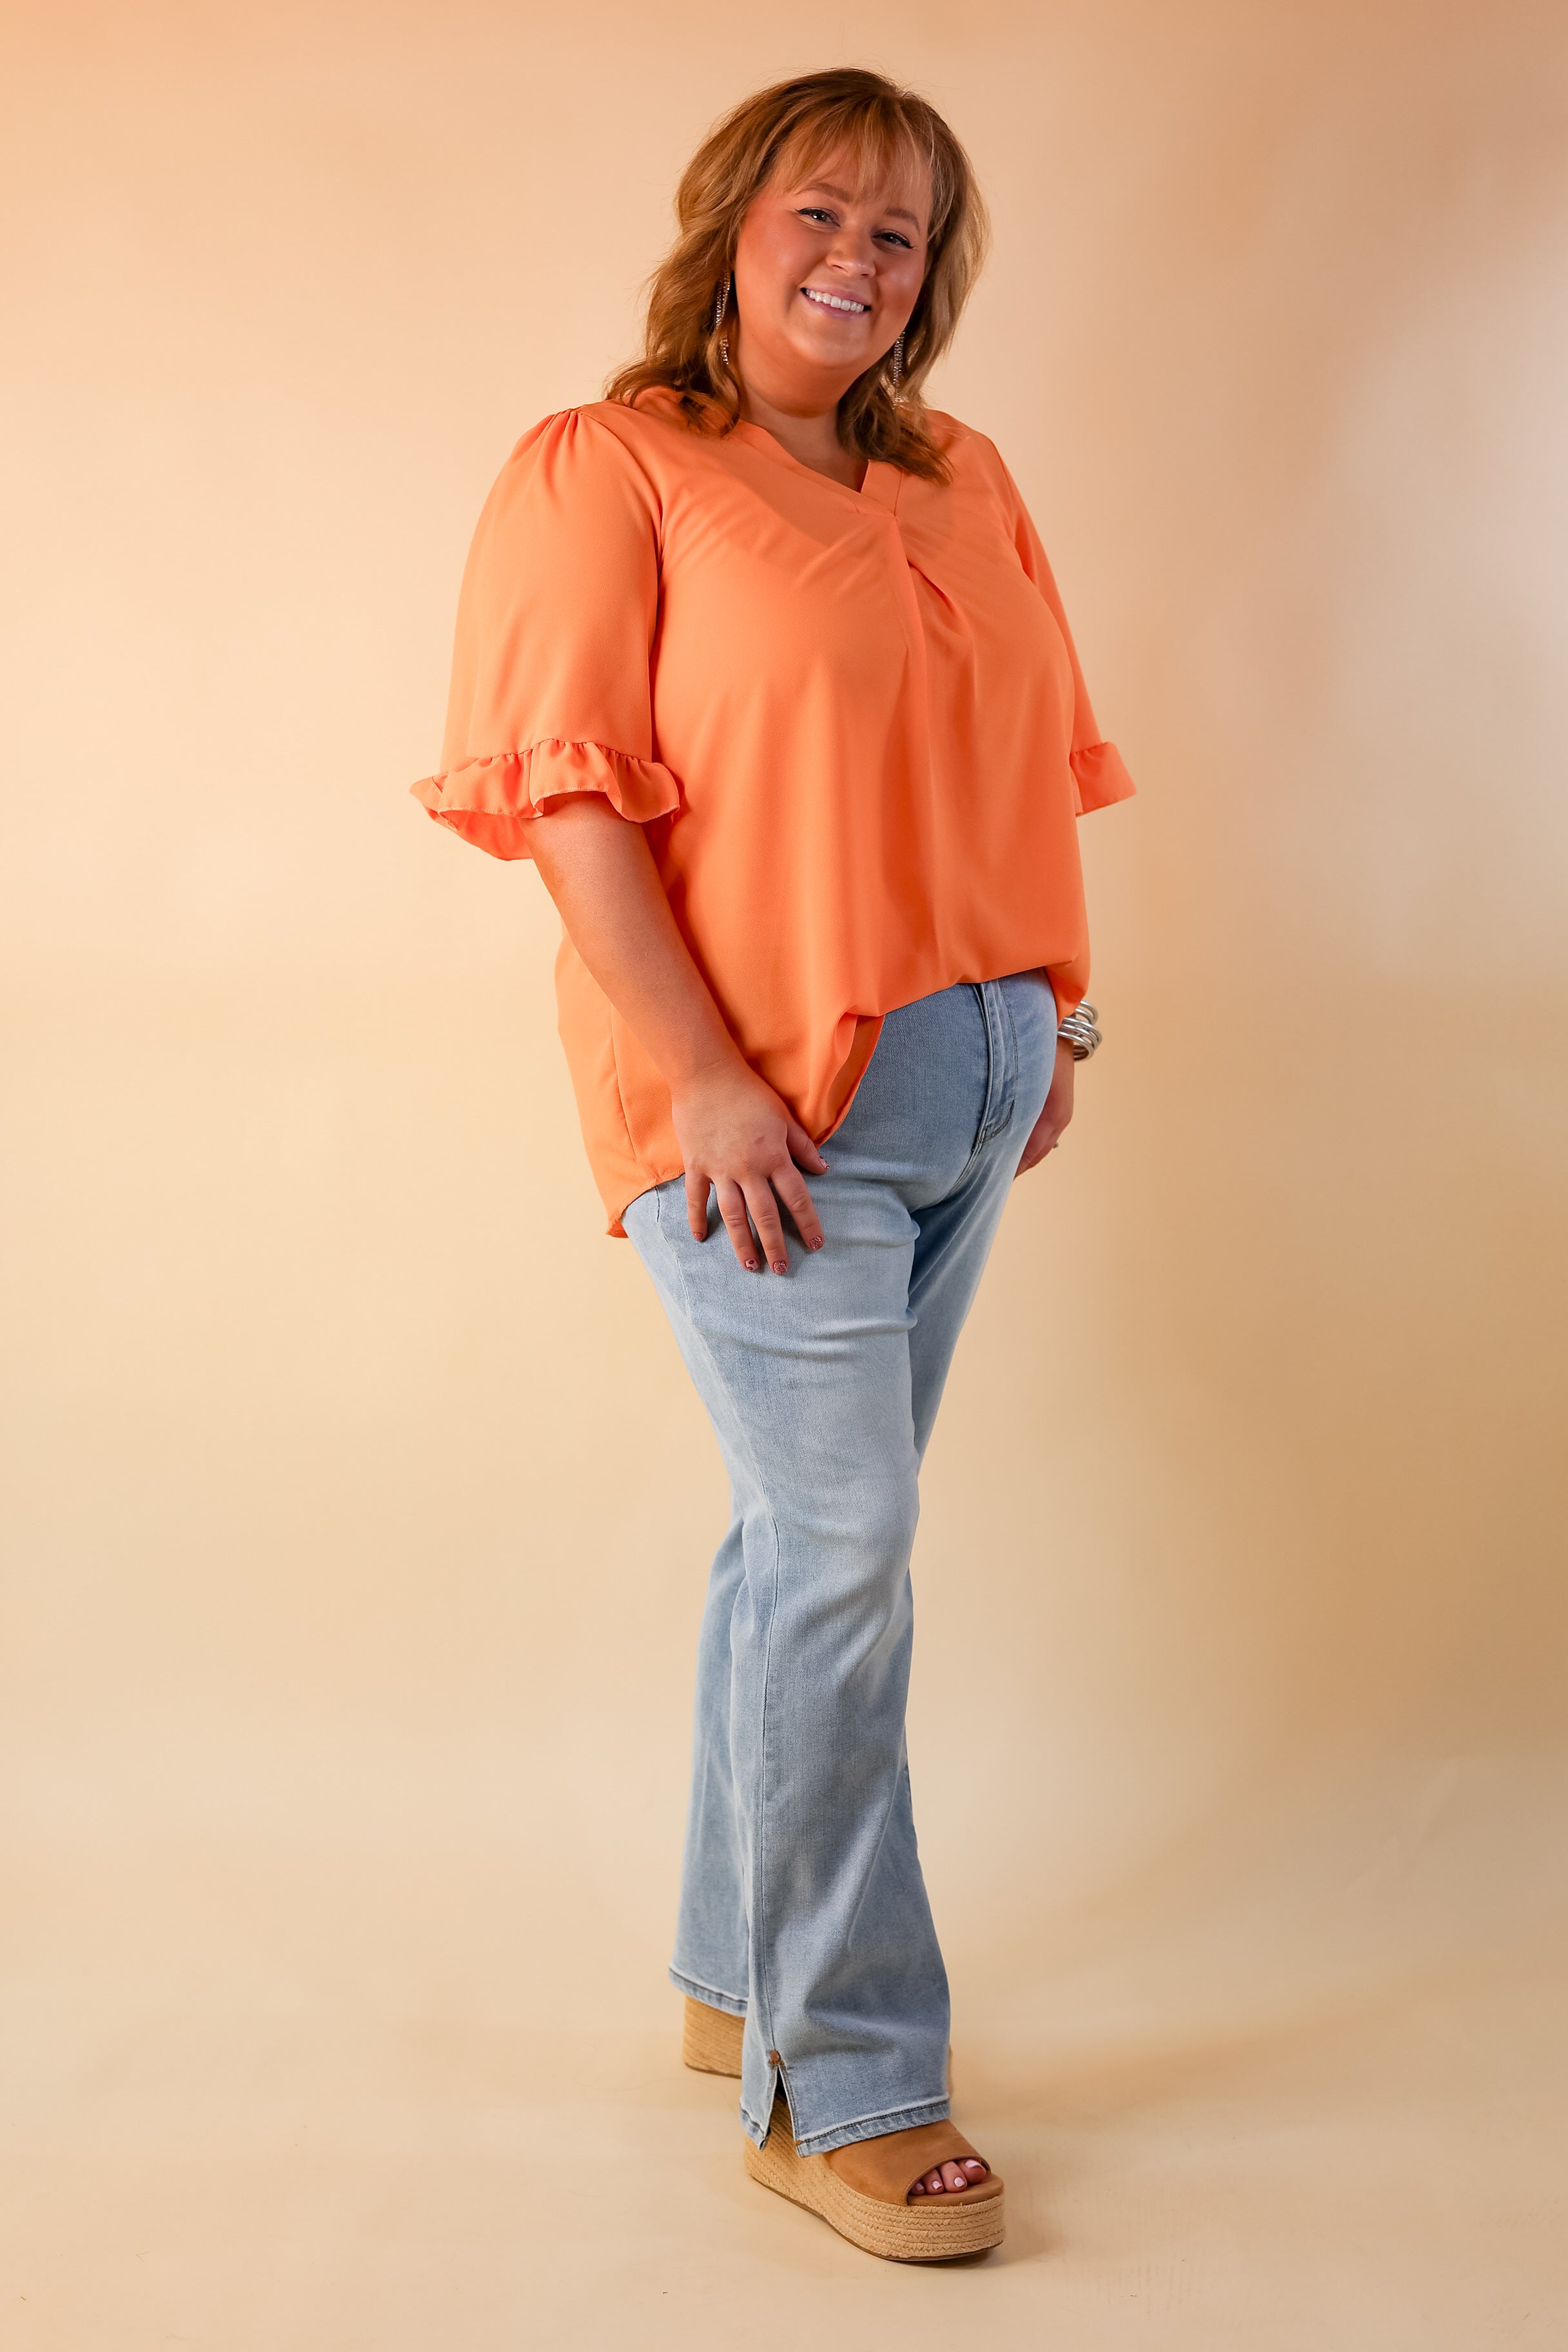 Radiant Ways Ruffle Short Sleeve Top with V Neckline in Orange - Giddy Up Glamour Boutique